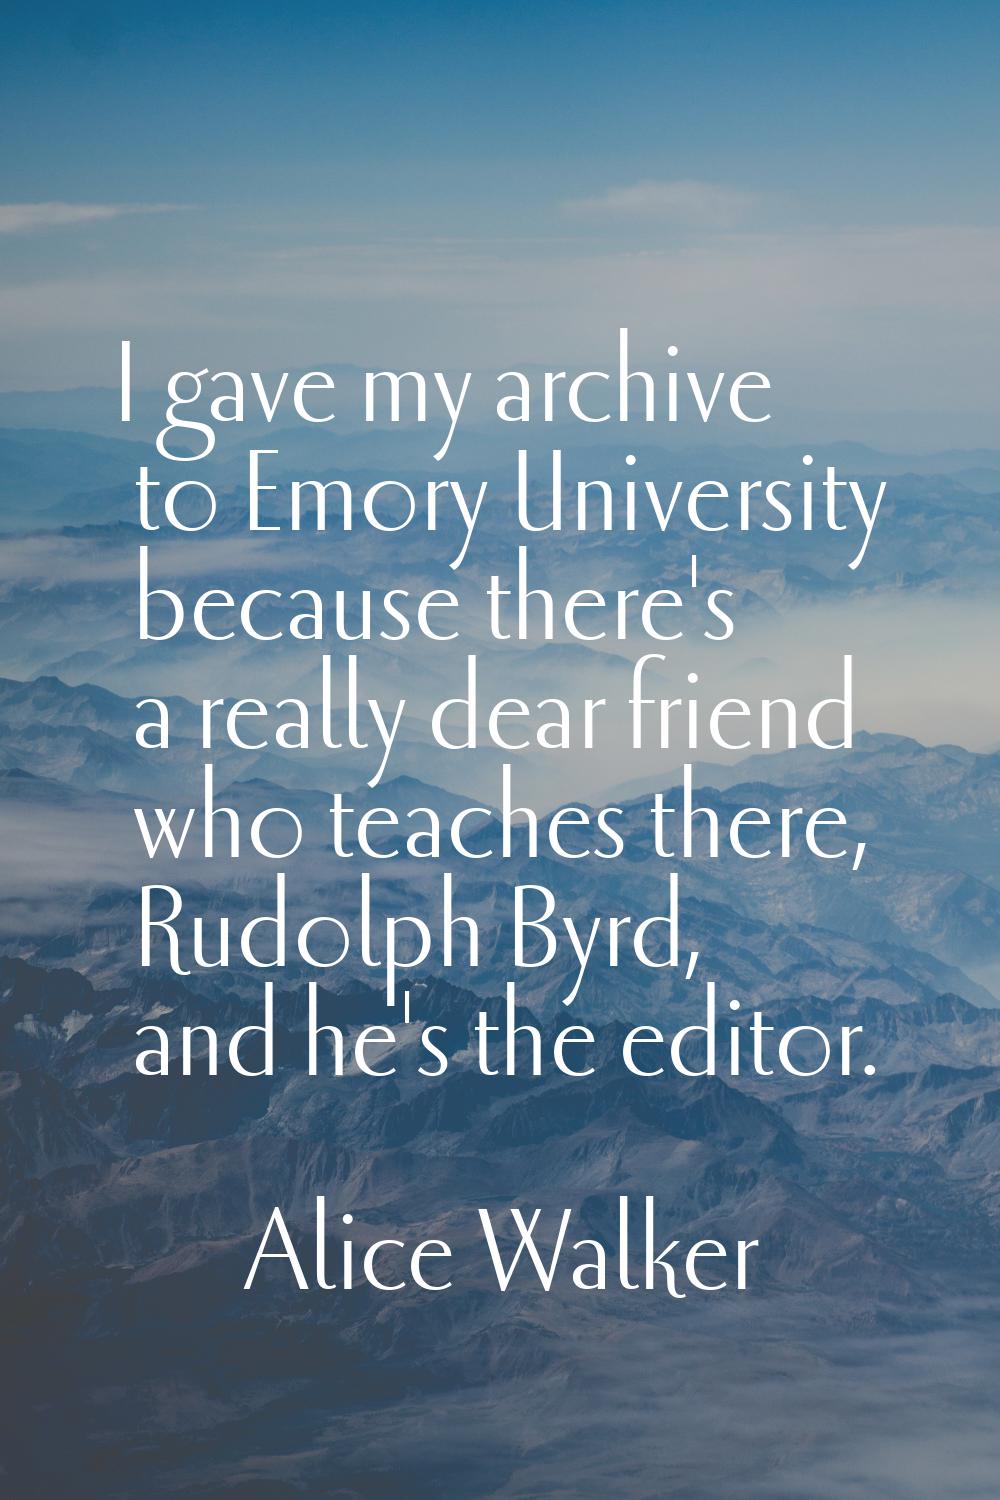 I gave my archive to Emory University because there's a really dear friend who teaches there, Rudol